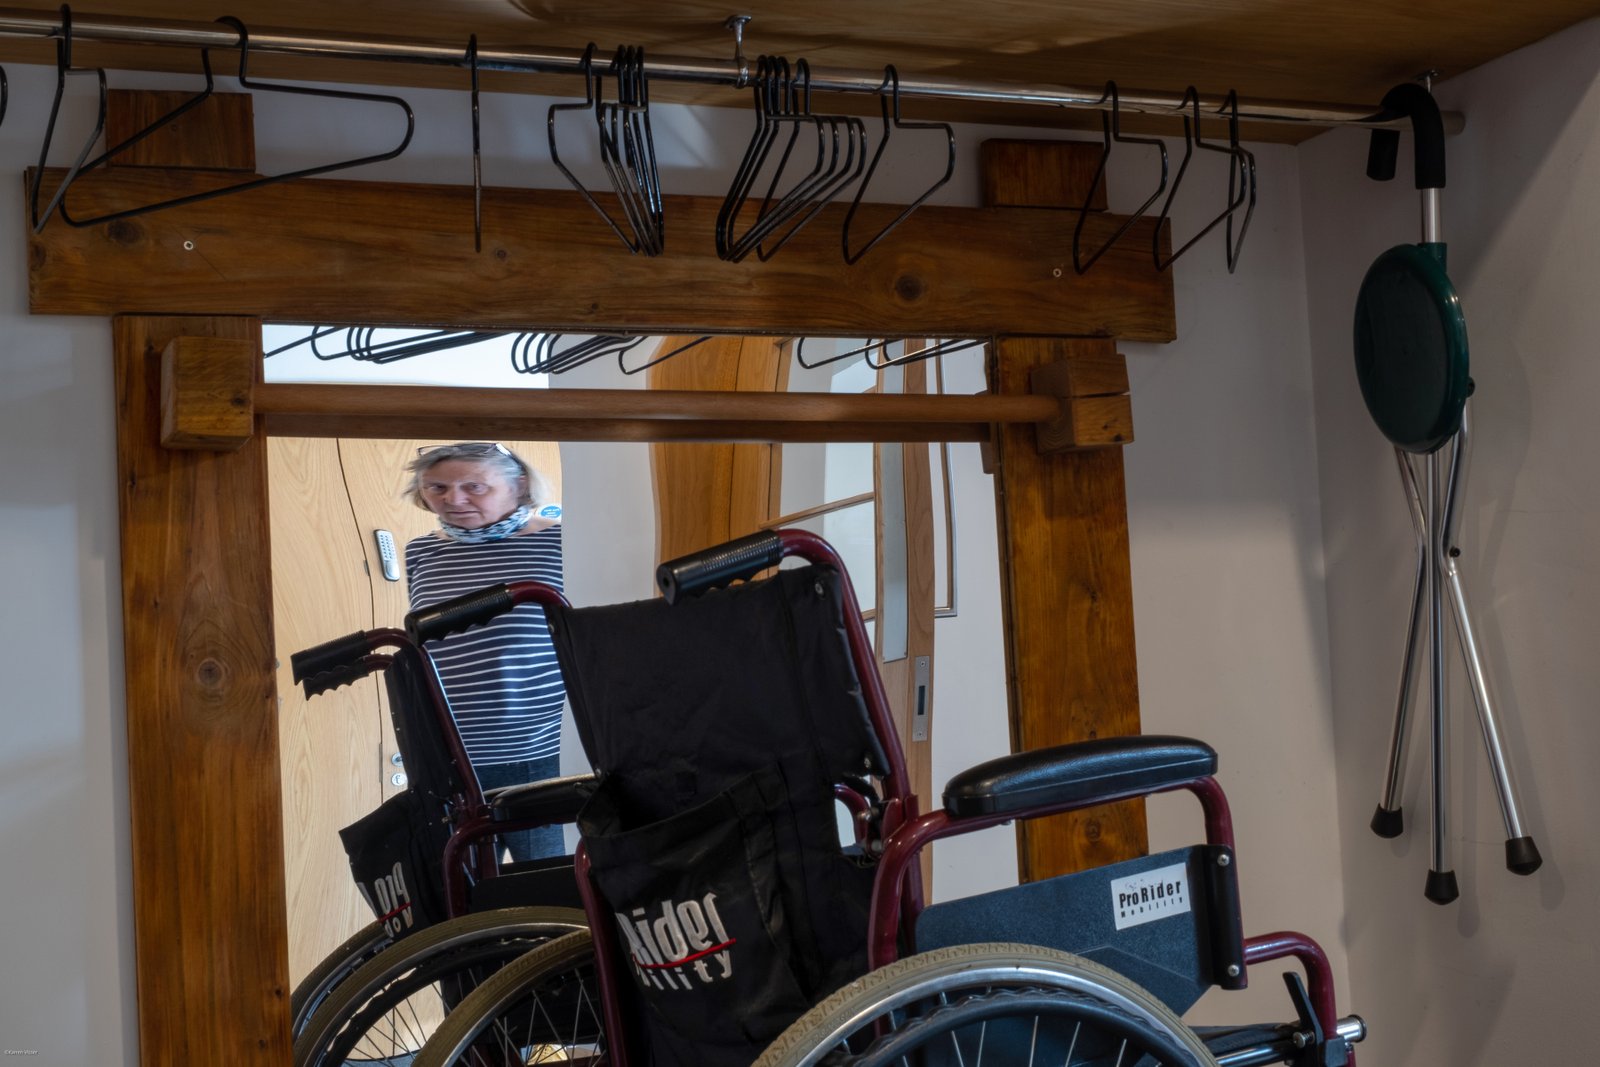 A wheelchair and a folding stool with coat hangers on a clothes rail are reflected in a large mirror, behind which is a distorted reflection of a white woman.